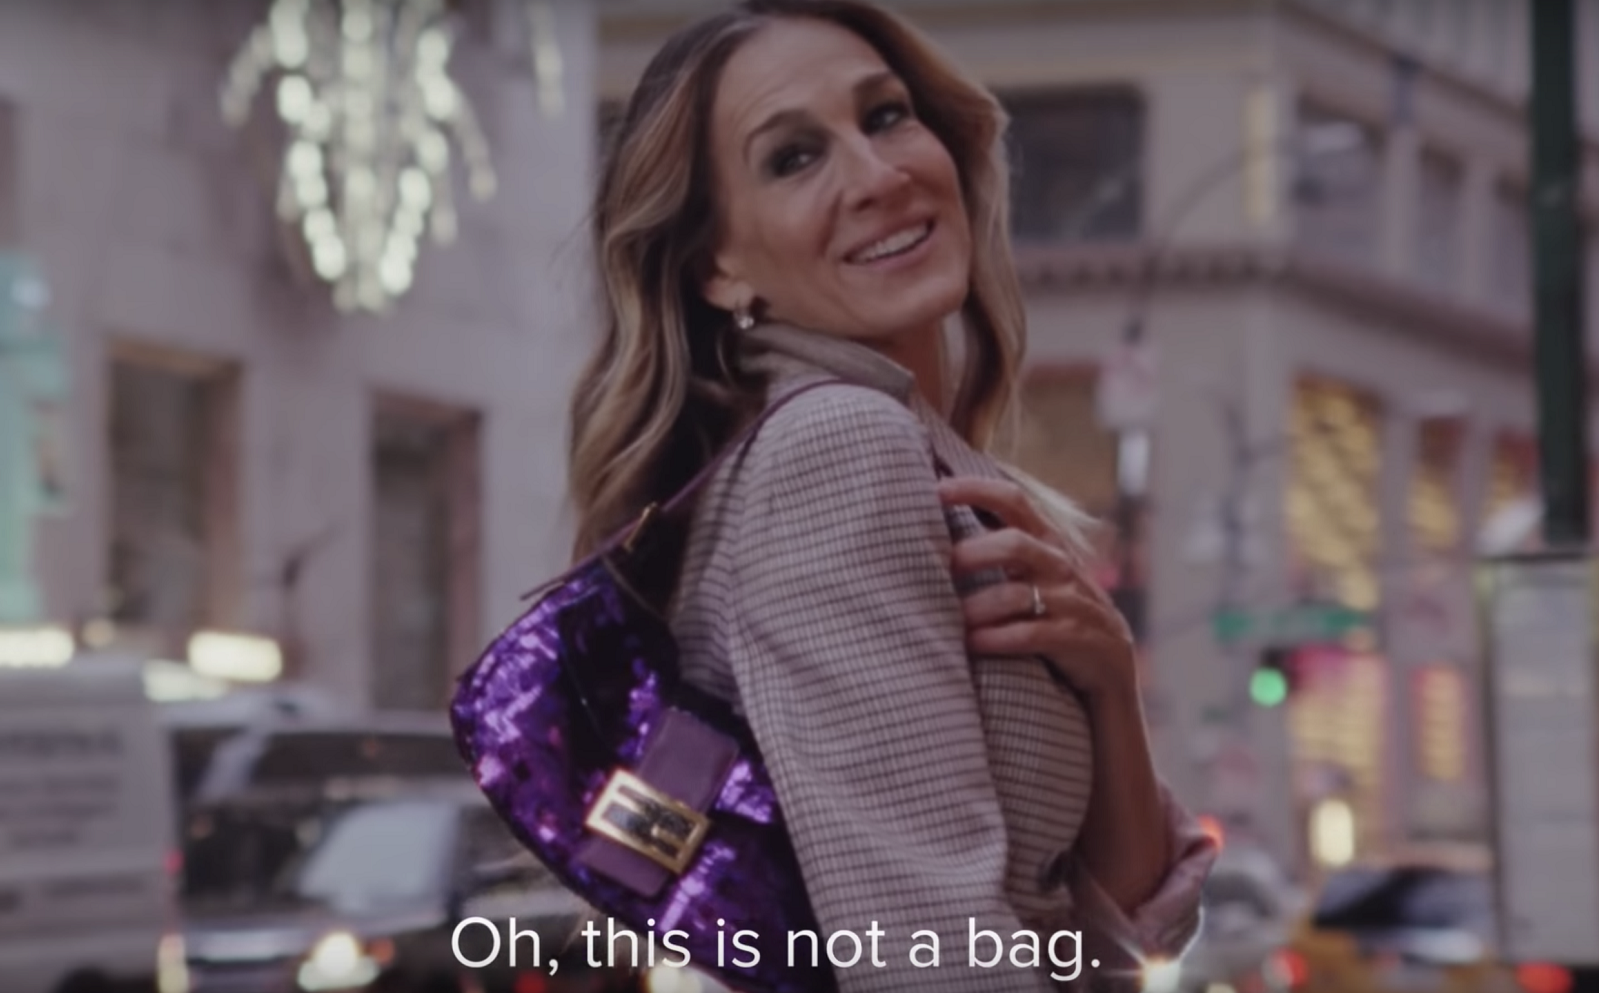 Carrie Bradshaw's Love of Fendi Baguettes Has Gone Too Far